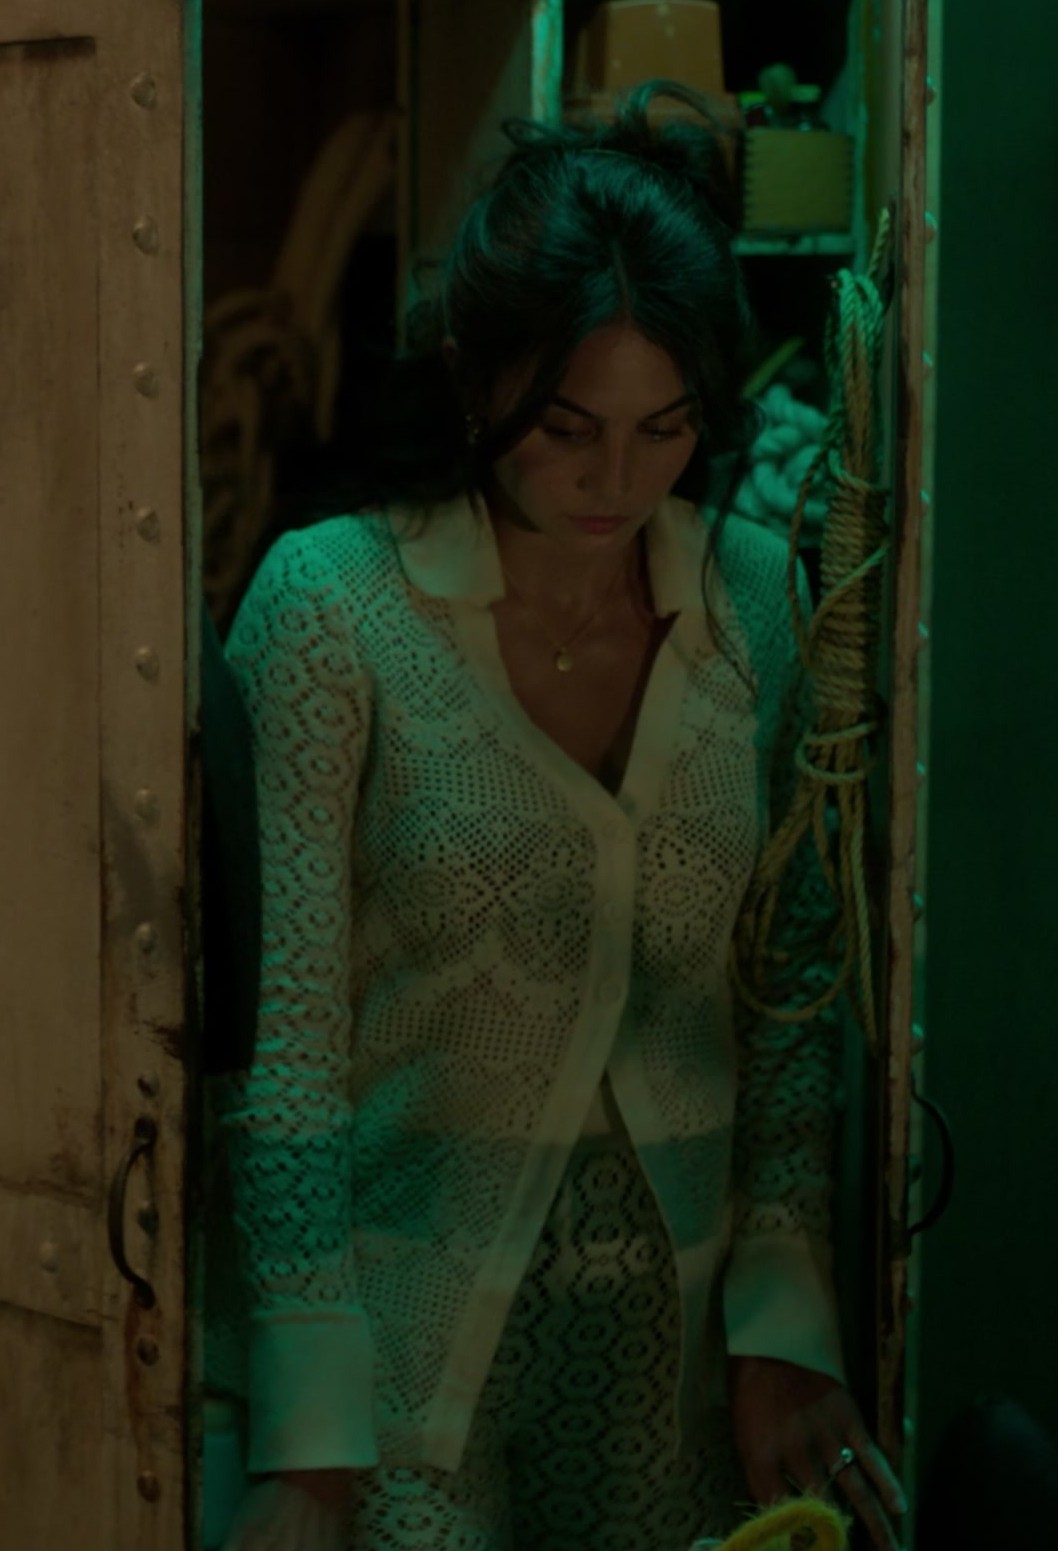 Worn on Death and Other Details TV Show - White Crochet Cardigan Worn by Pardis Saremi as Leila